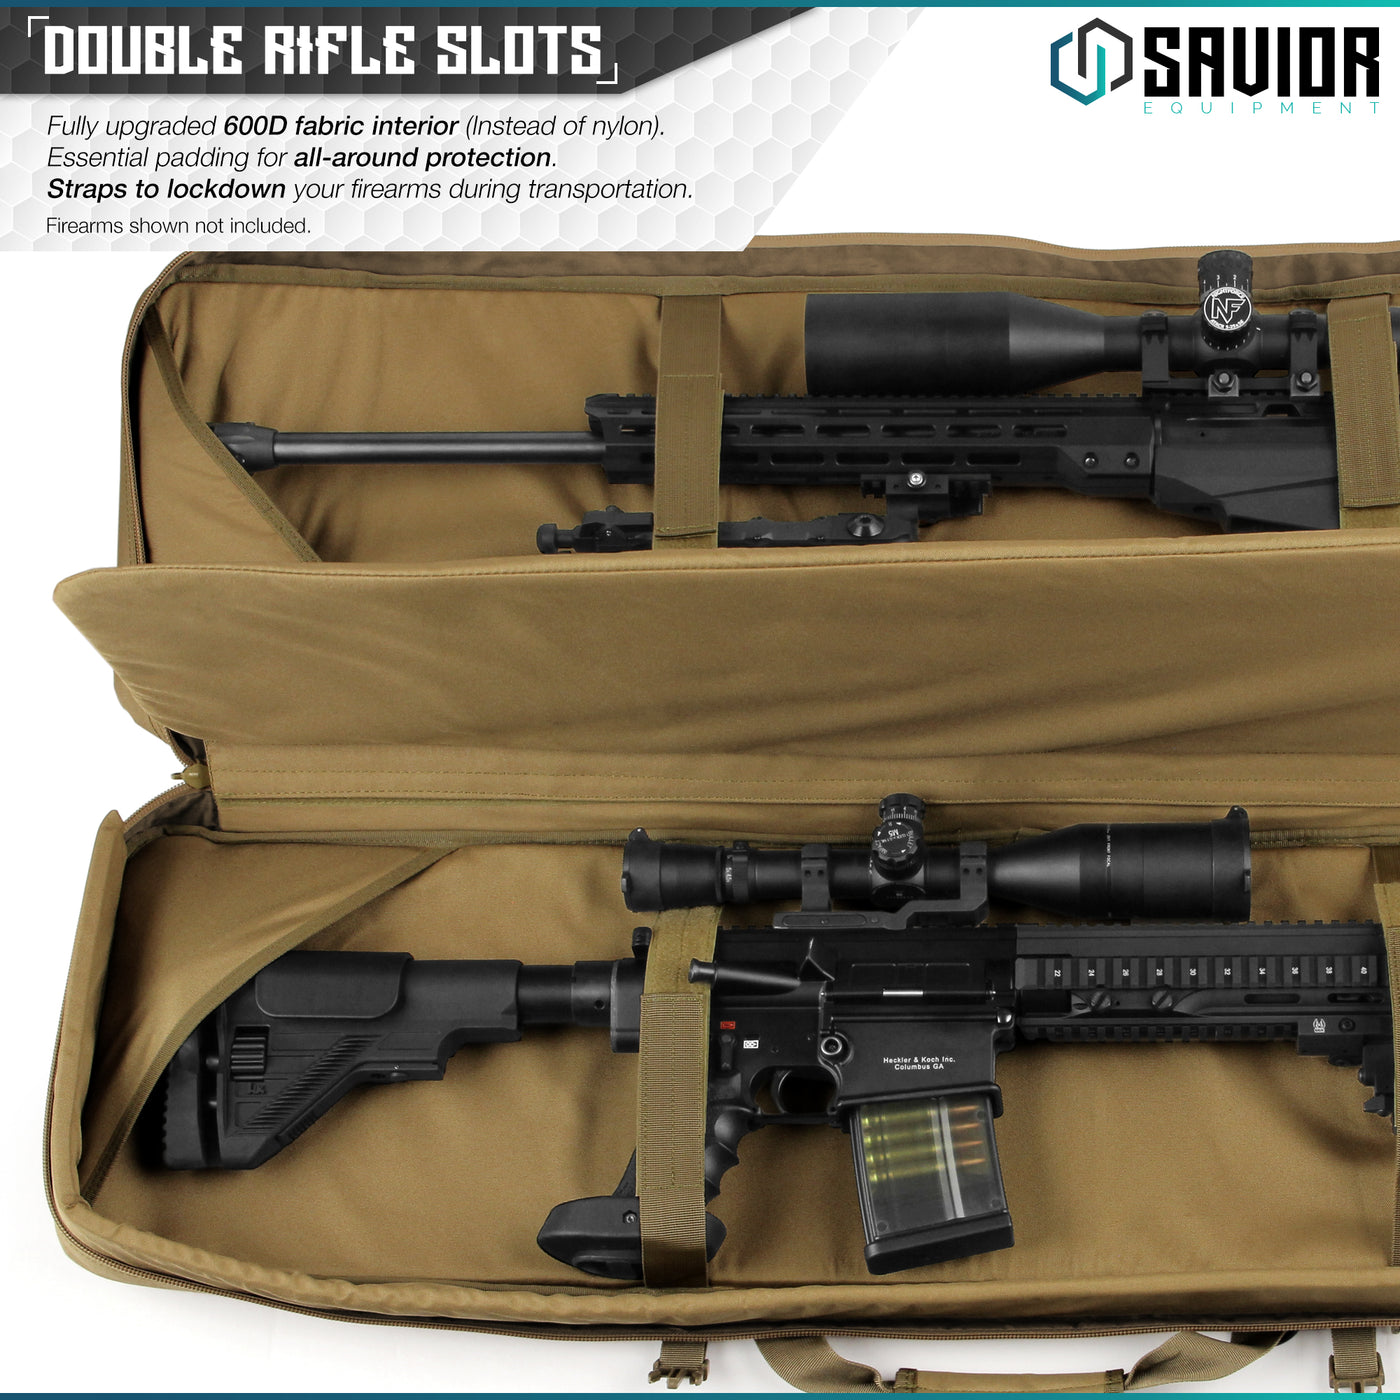 Double Rifle Slots - Fully upgraded 600D fabric interior (instead of nylon). Essential padding for all-around protection. Straps to lockdown your firearms during transportation. Firearms shown not included.